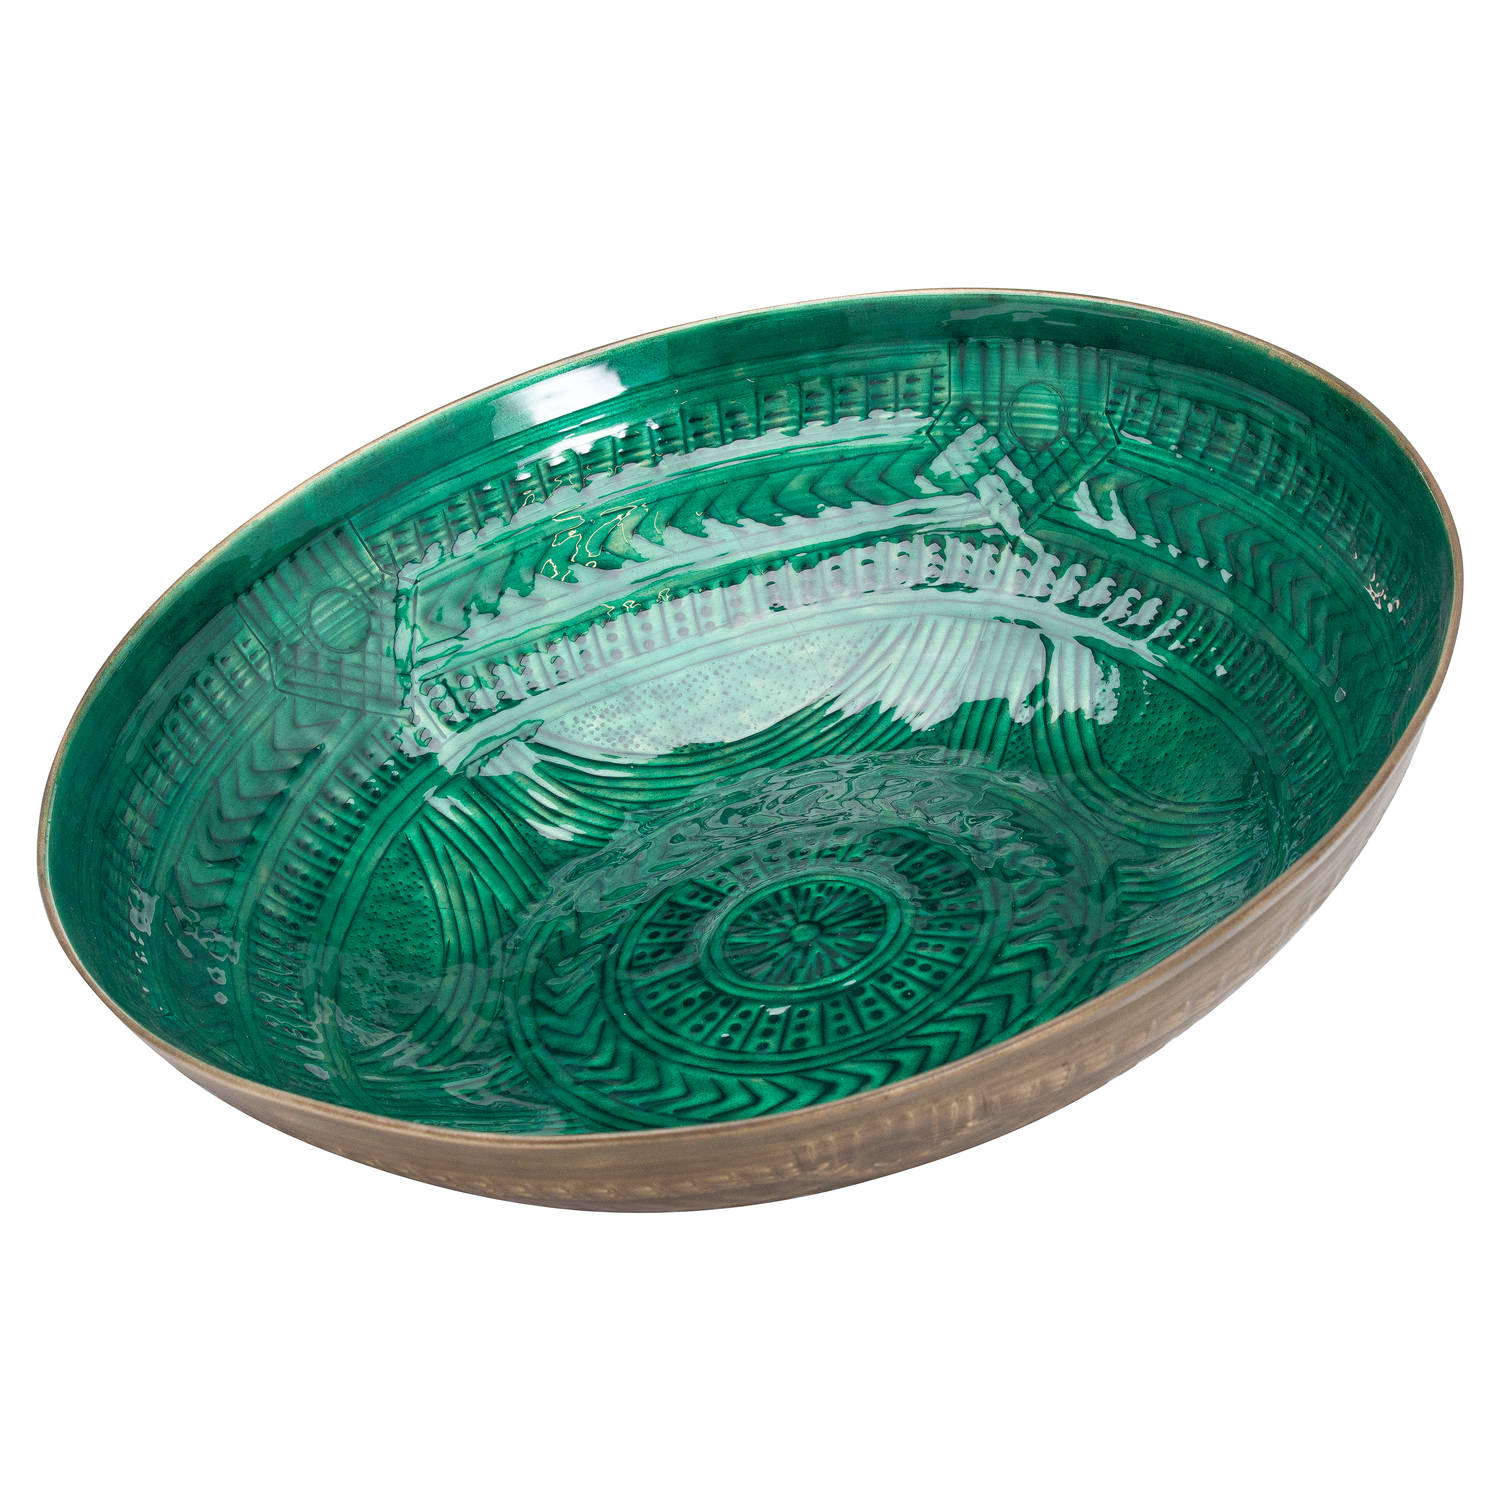 Aztec Collection Brass Embossed Ceramic Large Bowl - Image 1